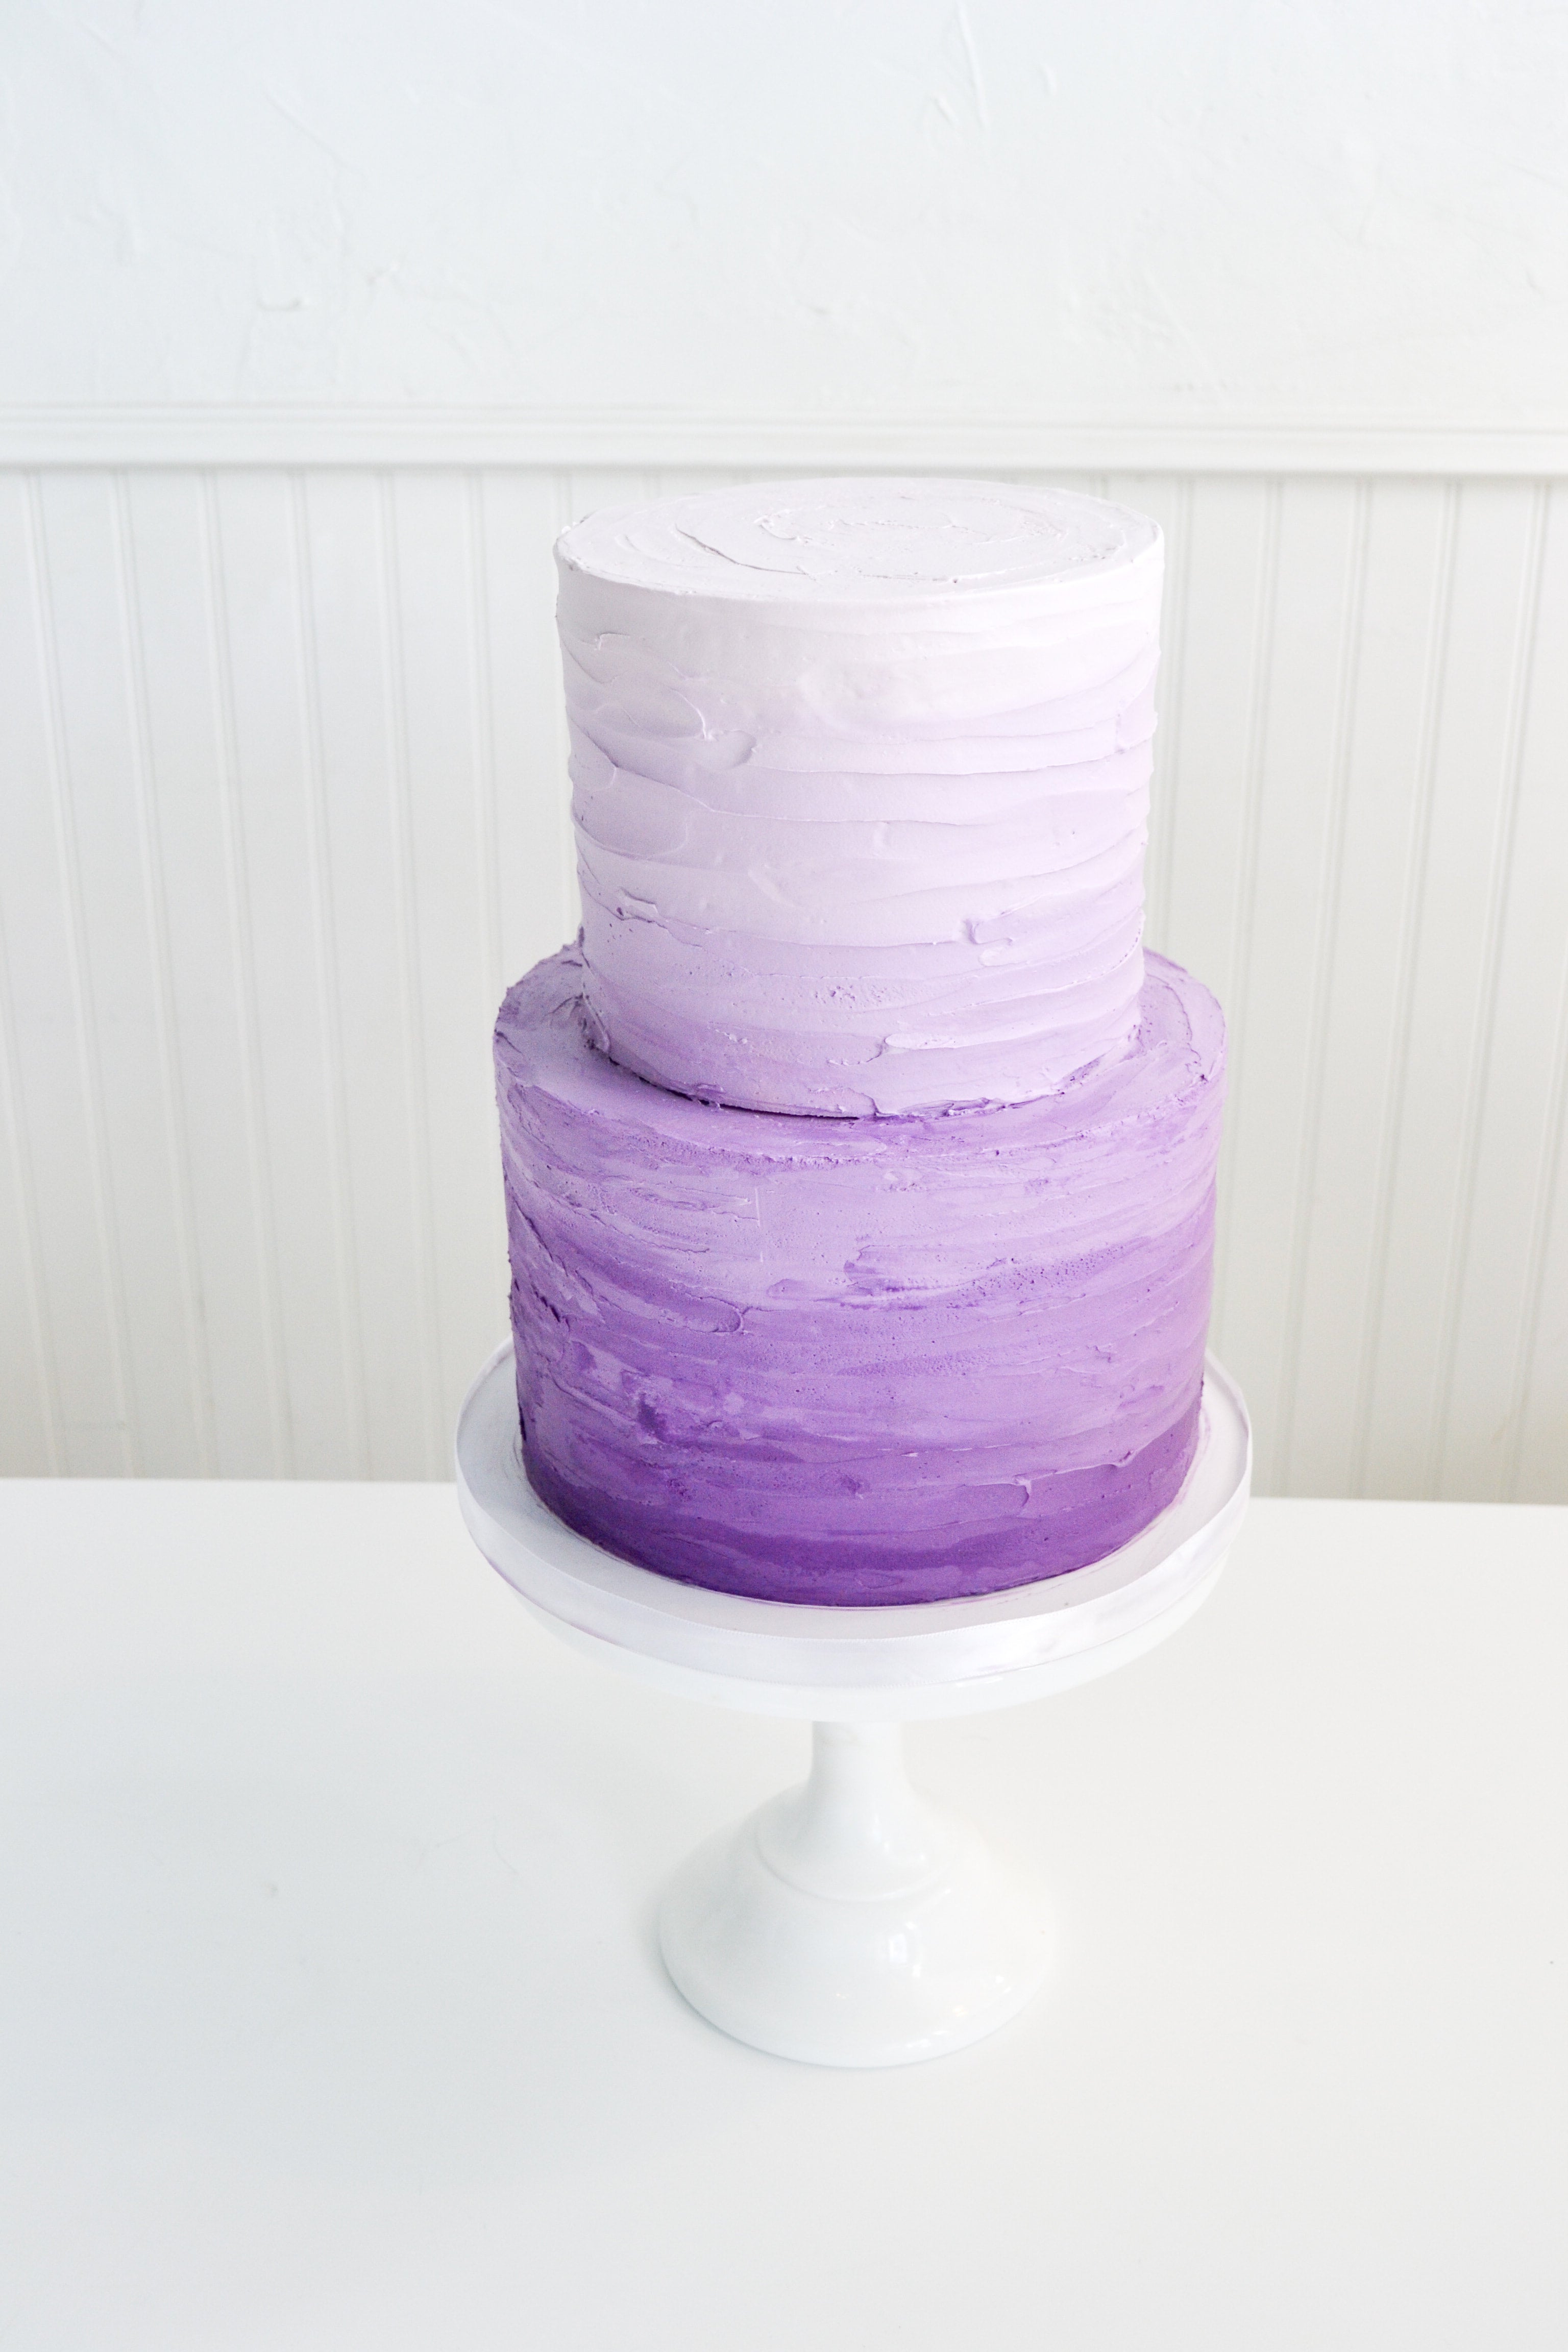 Easy and Vibrant Purple Ombre Cake Tutorial - YouTube